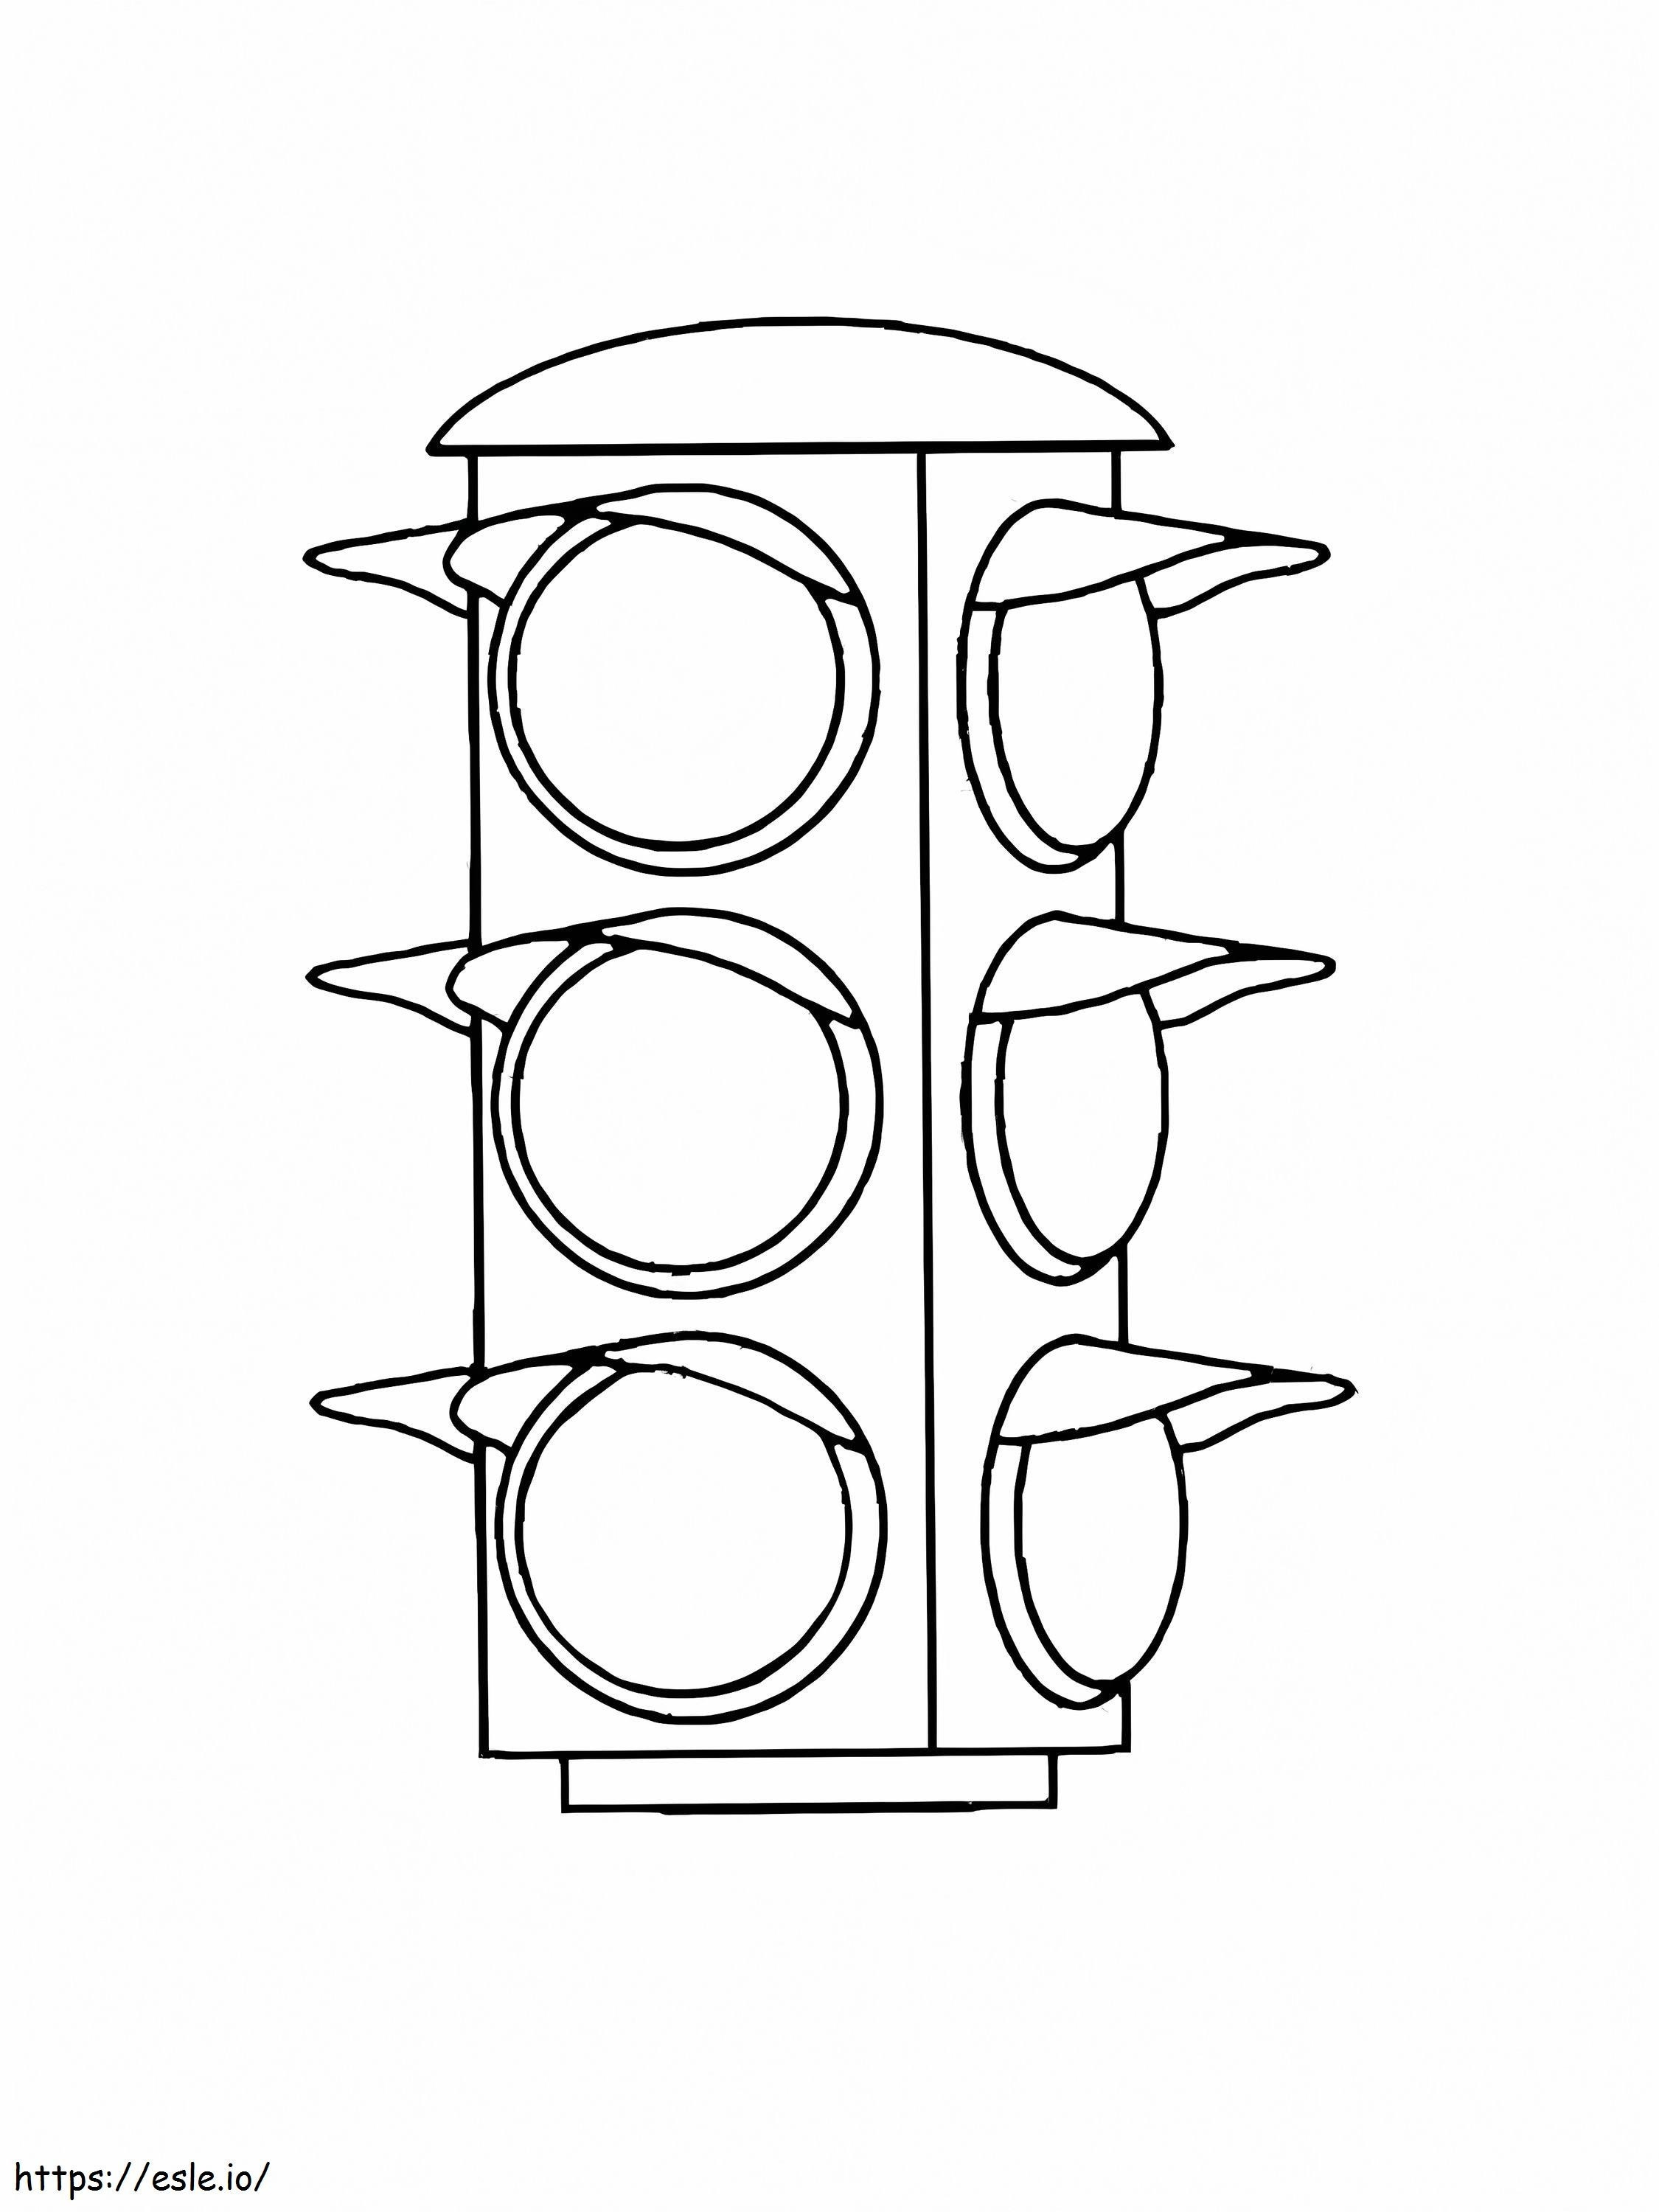 Incredible Traffic Light coloring page